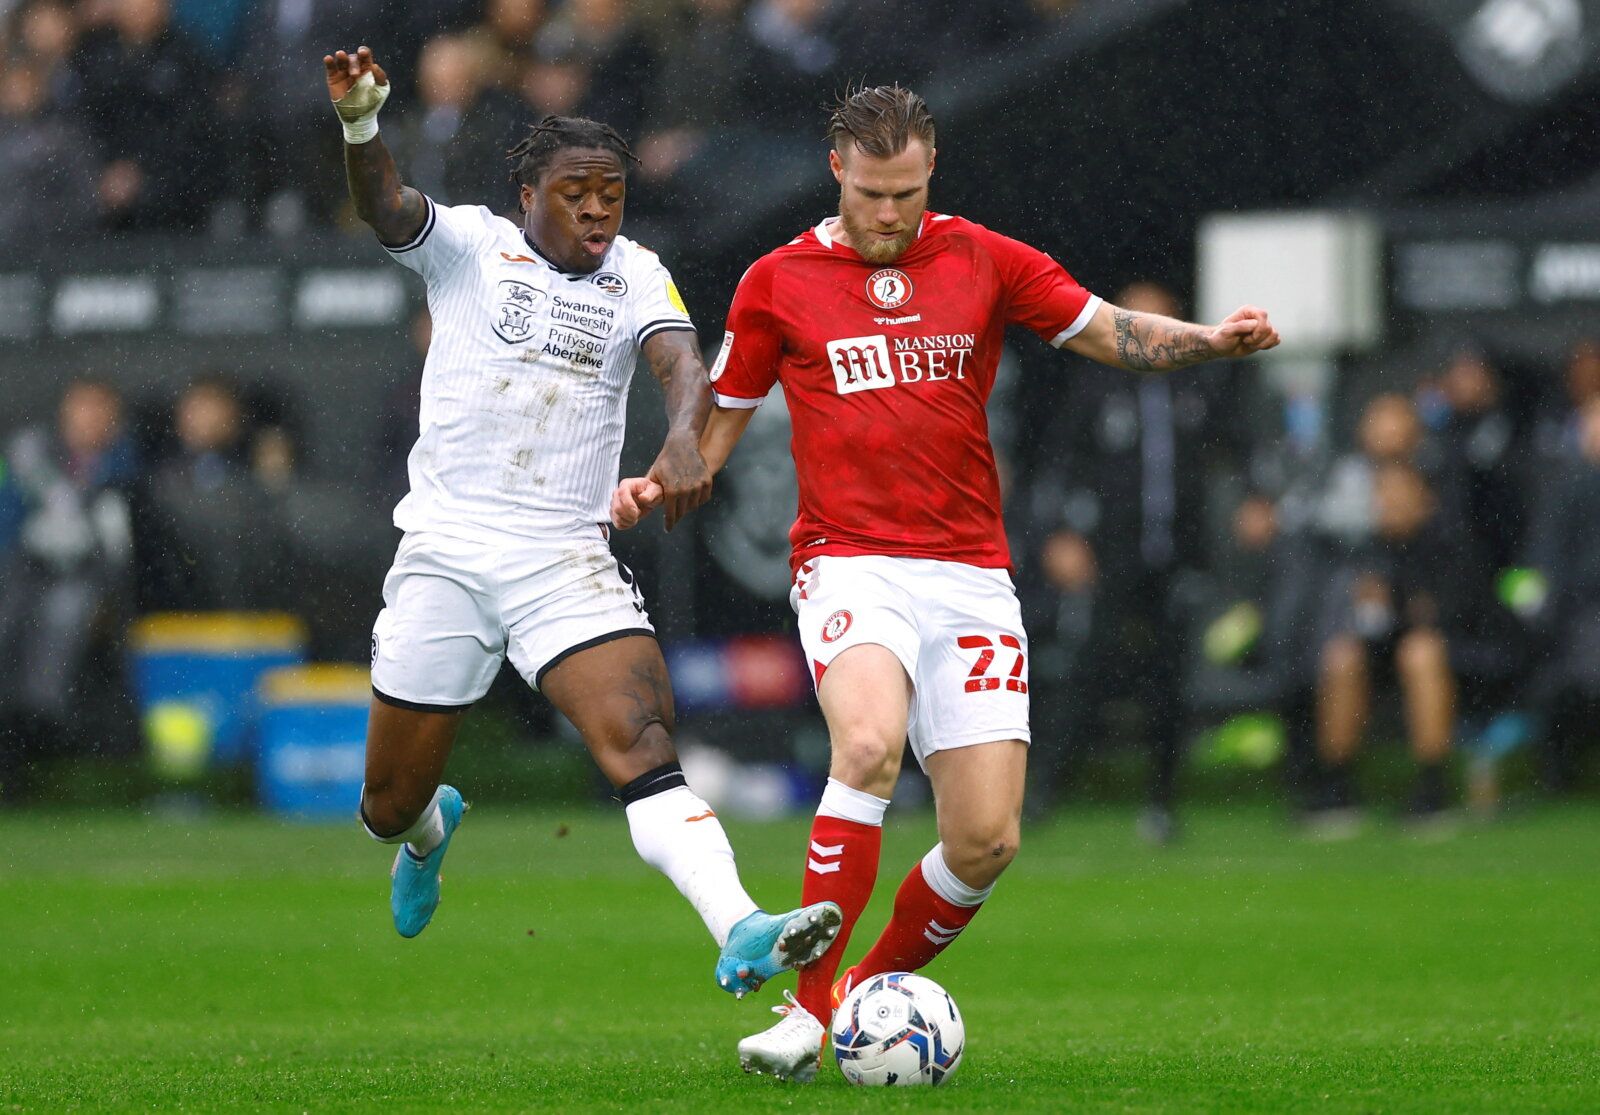 Soccer Football - Championship - Swansea City v Bristol City - Swansea.com Stadium, Swansea, Britain - February 13, 2022 Swansea City's Michael Obafemi in action with Bristol City's Tomas Kalas    Action Images/Andrew Boyers  EDITORIAL USE ONLY. No use with unauthorized audio, video, data, fixture lists, club/league logos or 